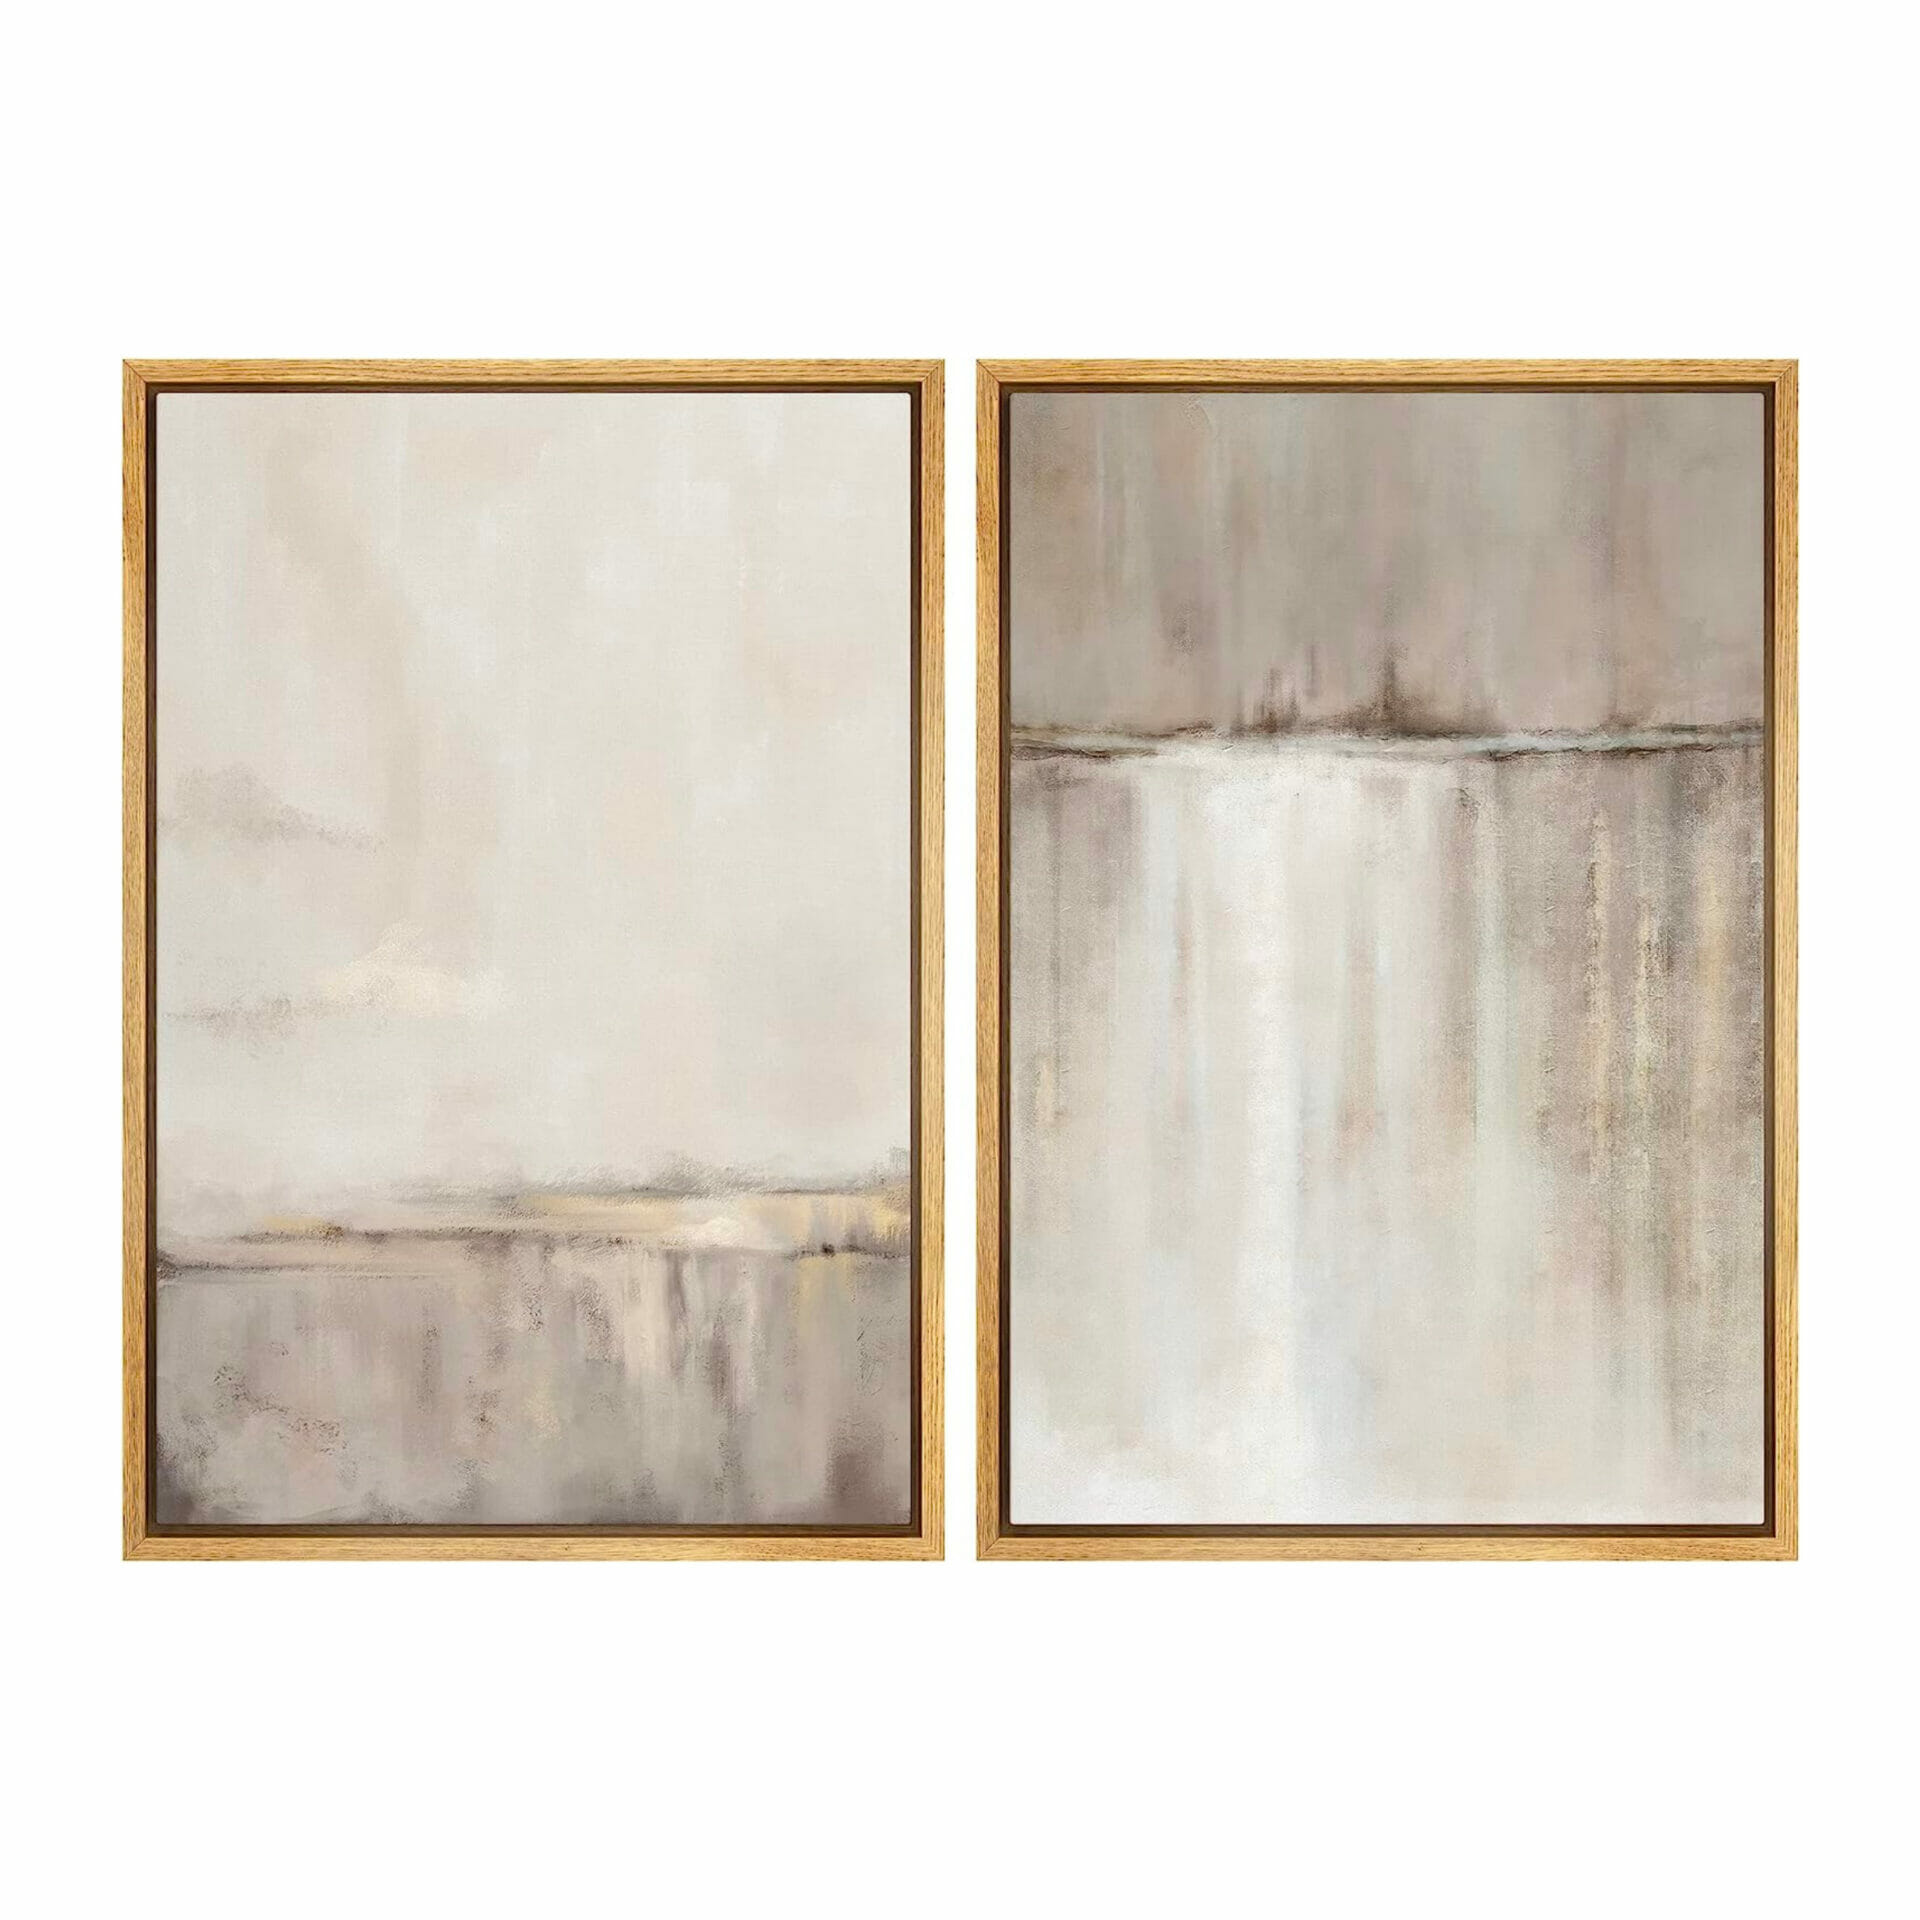 home decor art affordable budget friendly amazon neutral art designer lookalike look for less